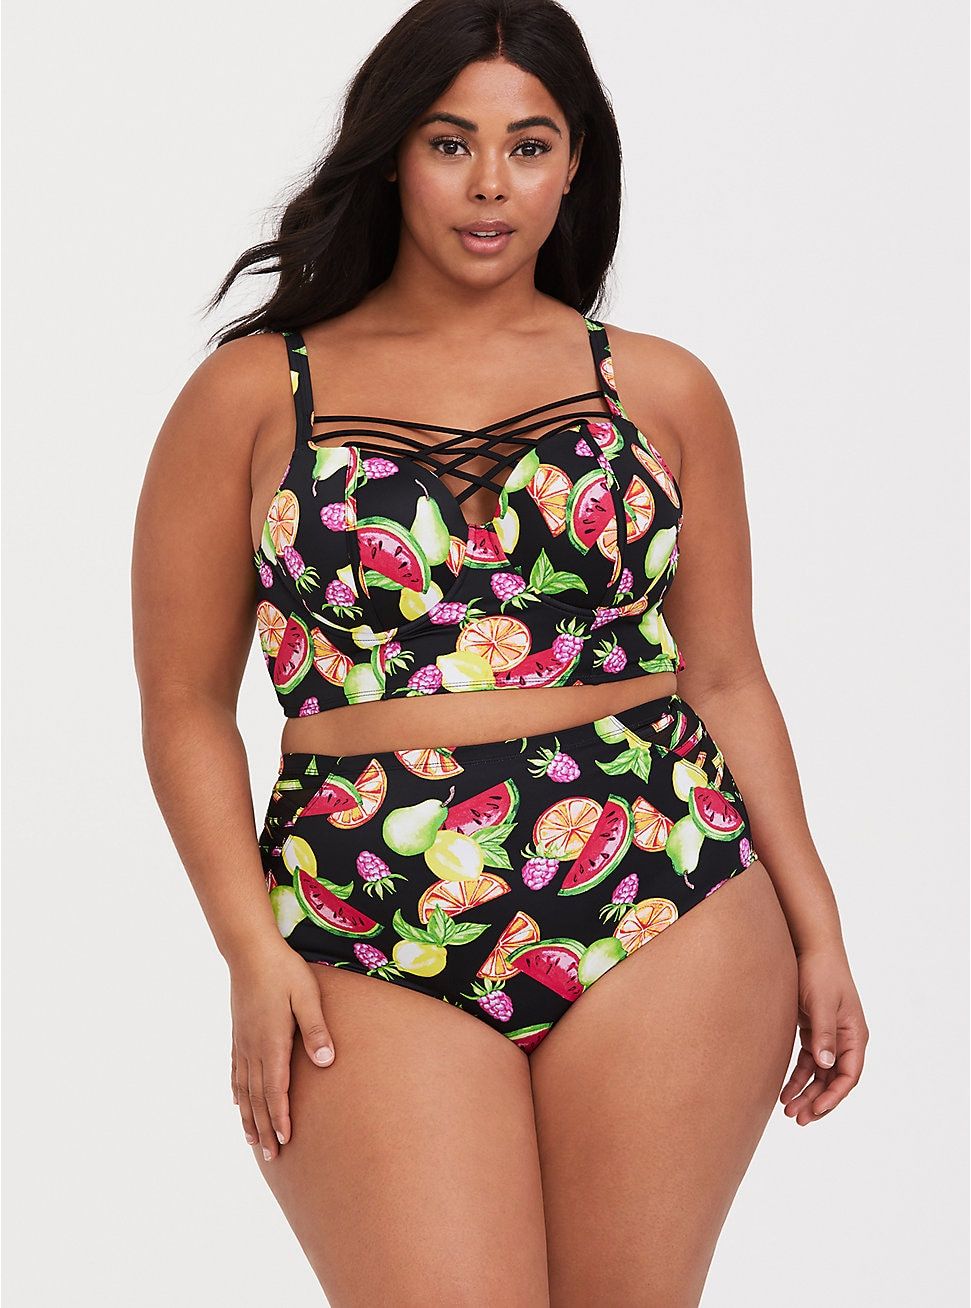 20 Best Swimsuits for Big Busts Bikinis Swimsuits for Large Boobs